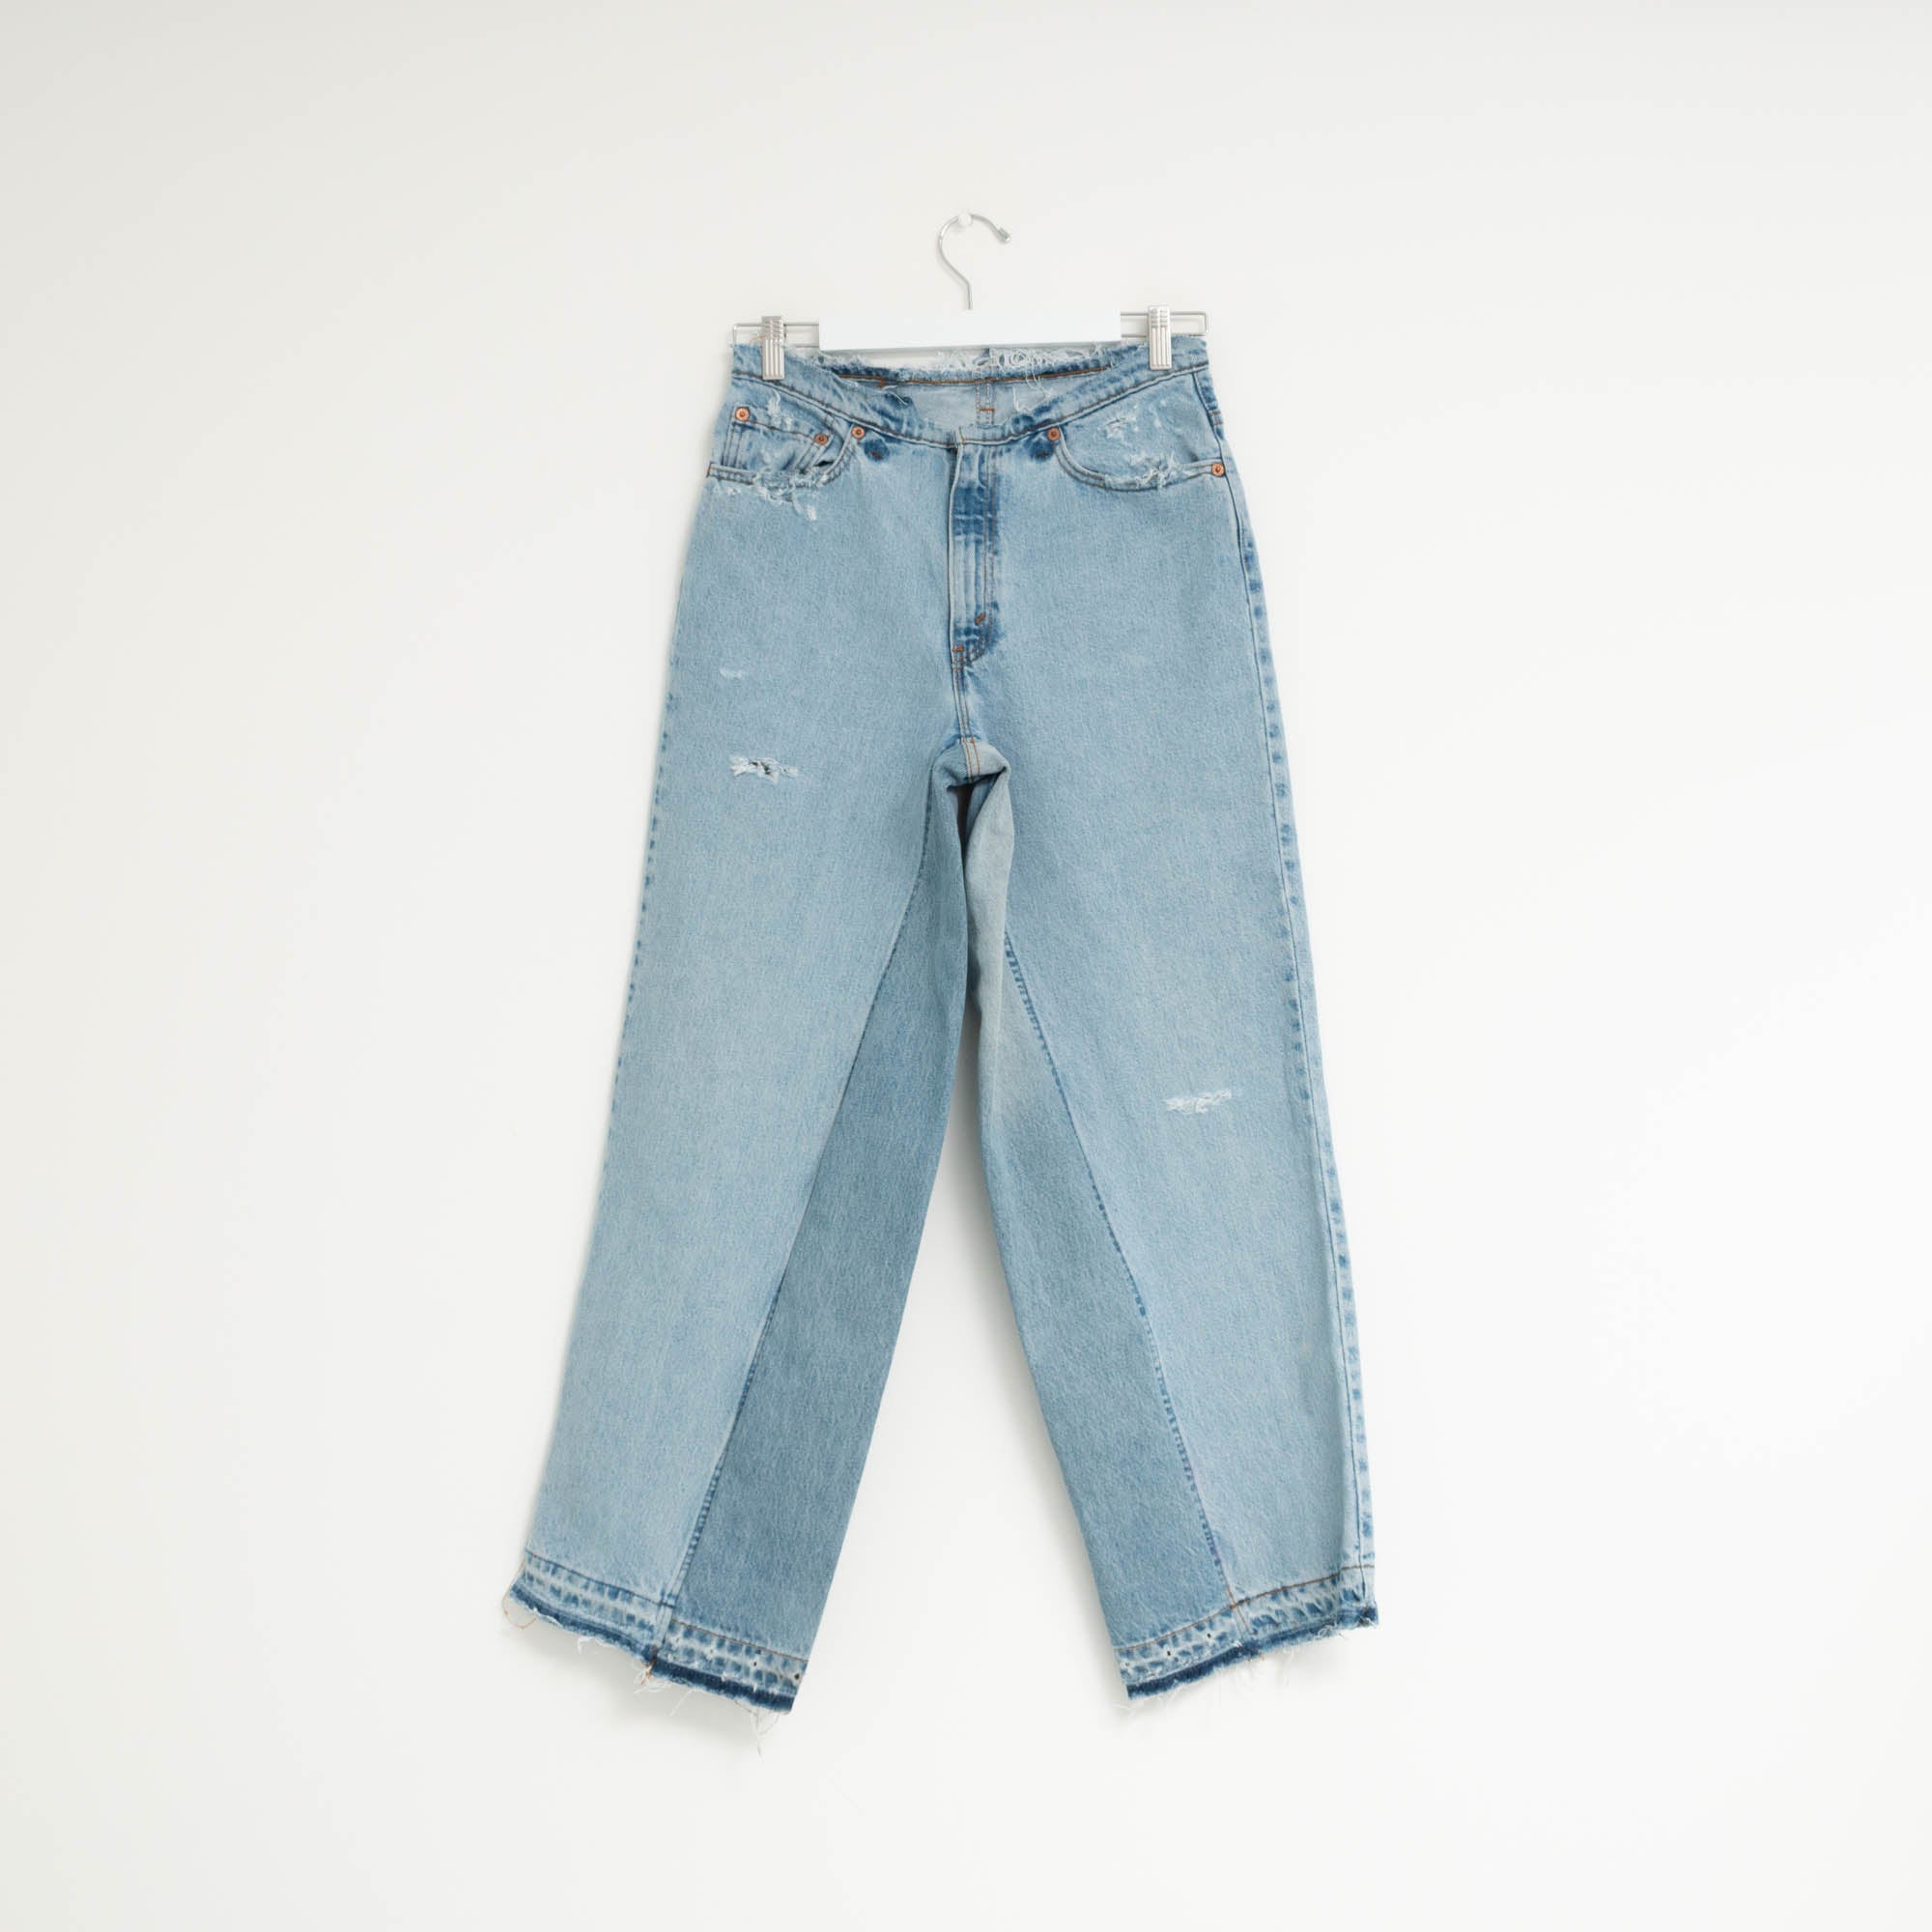 "FLARE" Jeans W30 L30